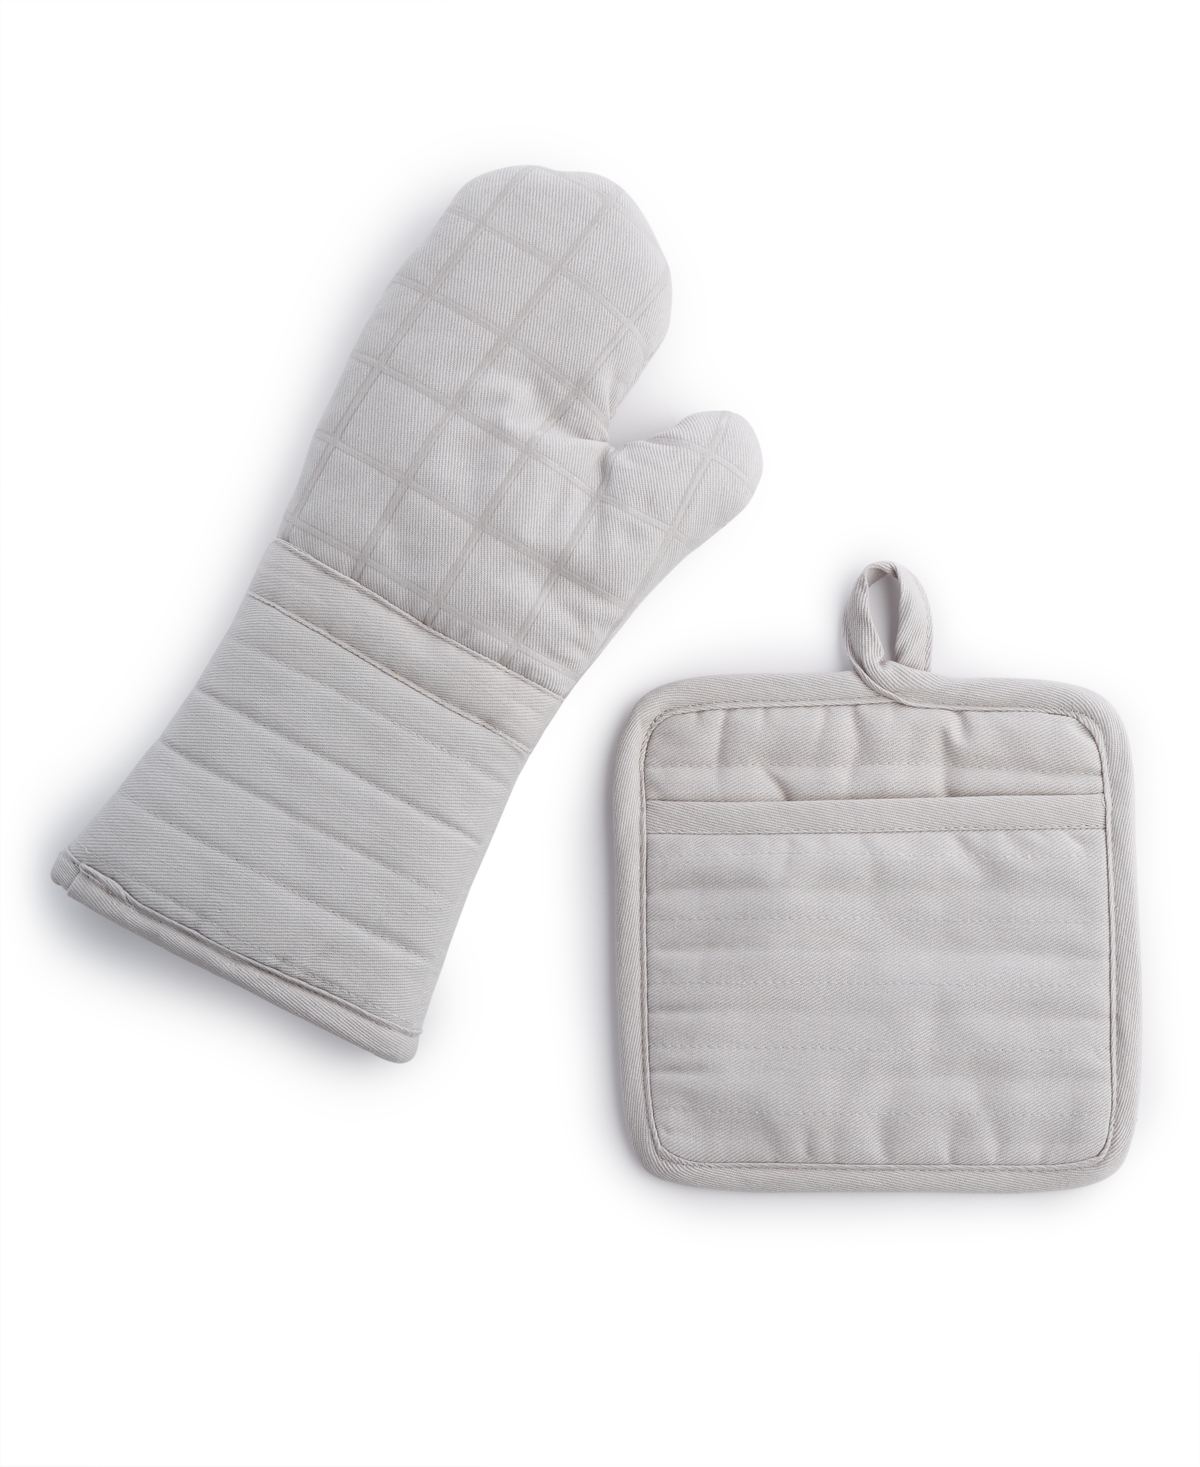 All-Clad Ribbed Silicone Cotton Twill Oven Mitt, Set of 2 - Macy's